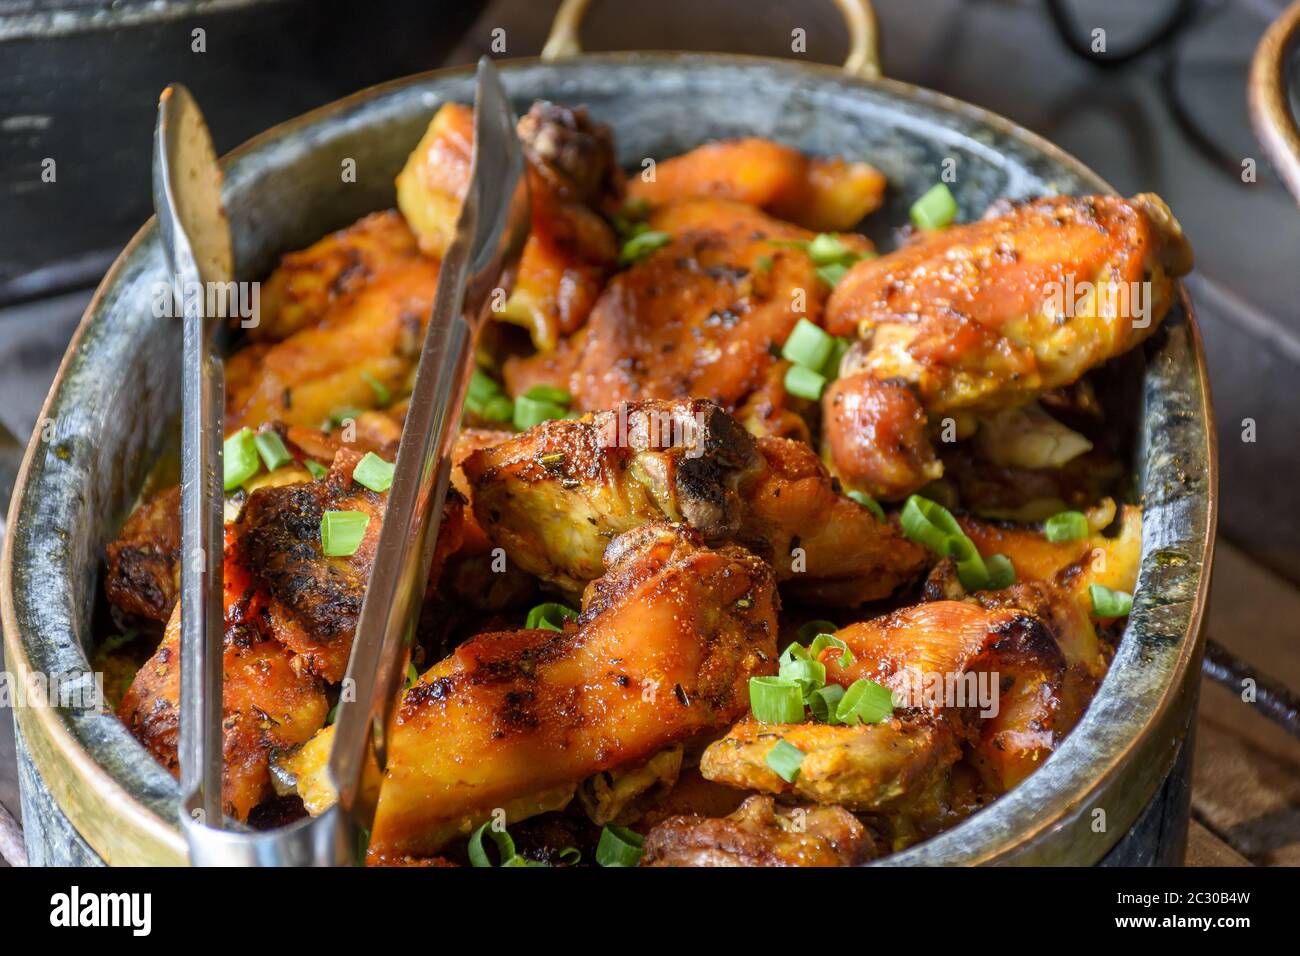 Chicken in traditional Brazilian food, clay pots and wood stove Stock Photo